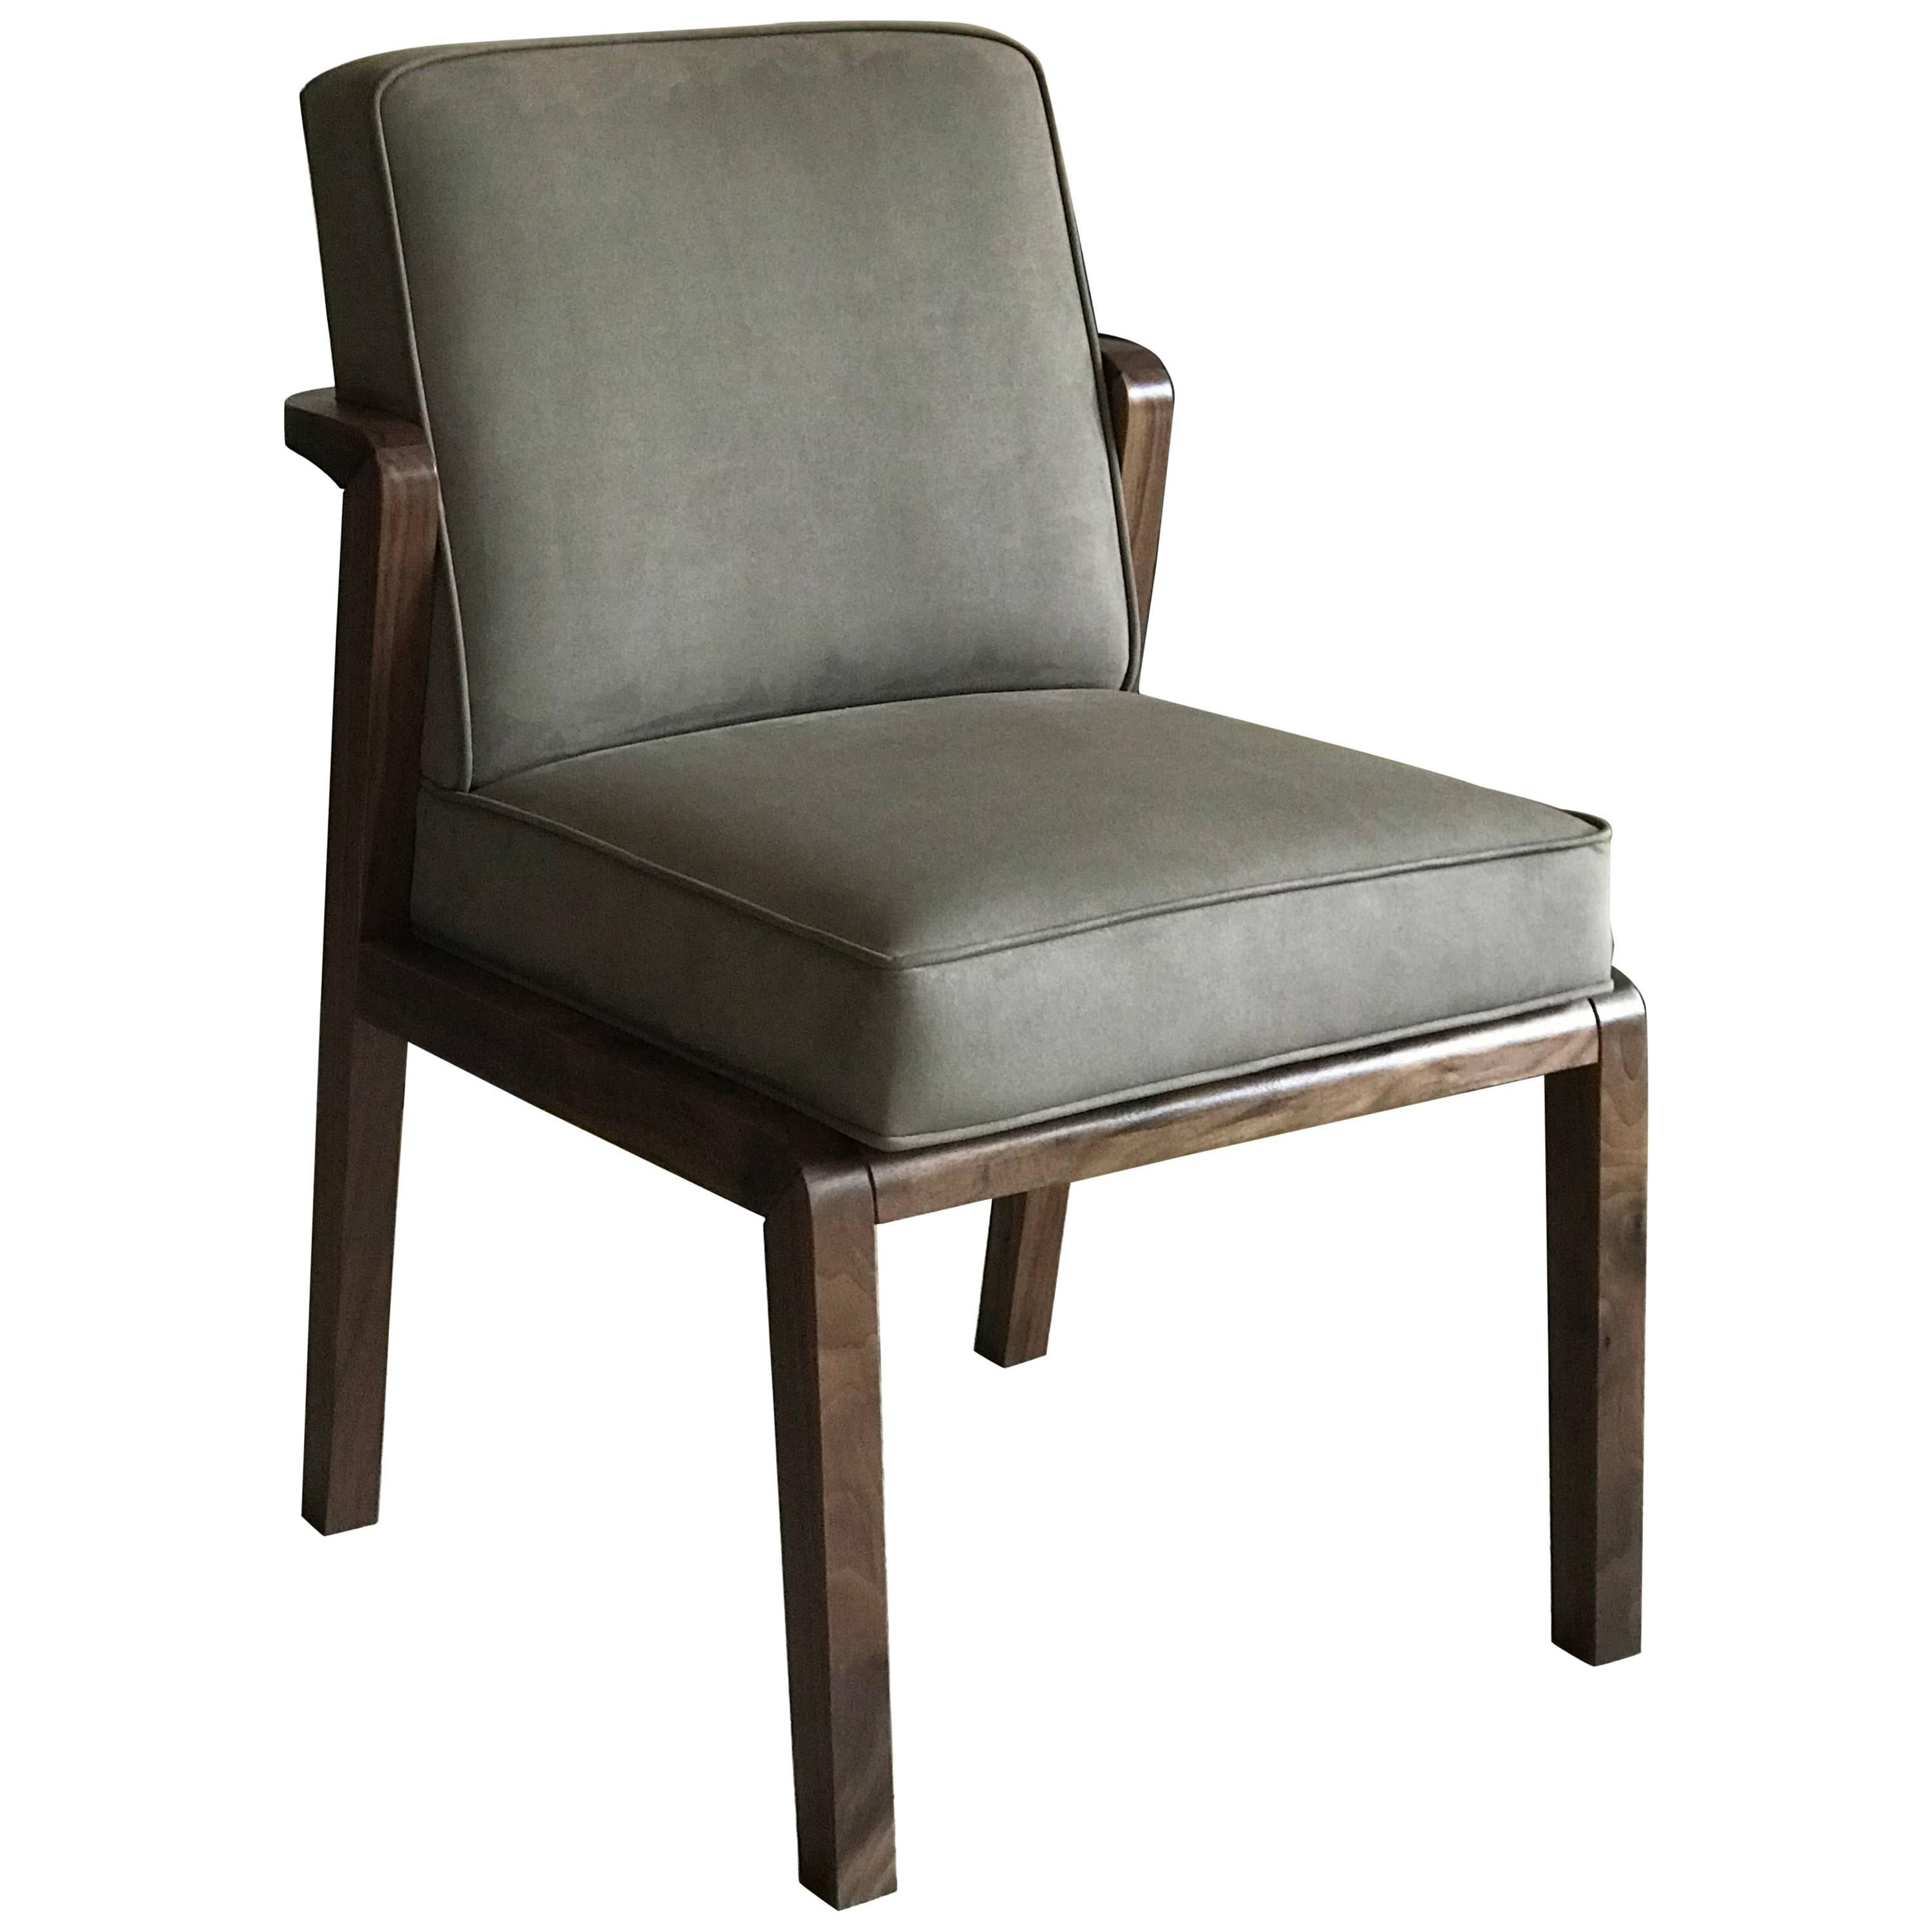 Atena Dining Chair in Walnut Upholstered with Nova Suede